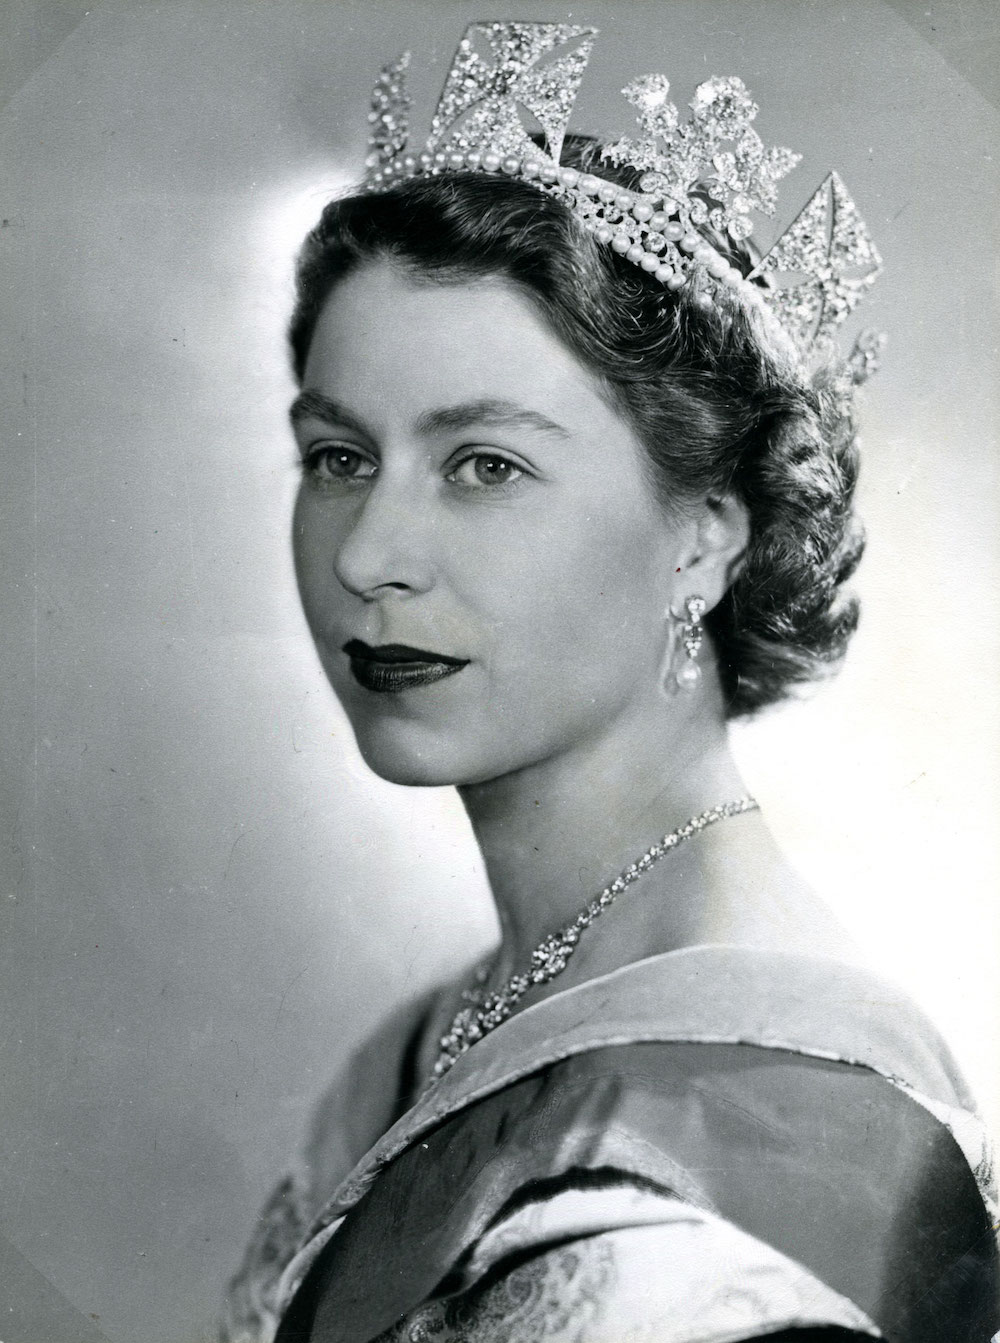 One of the 1952 Dorothy Wilding portraits of the Queen that was used as the basis for the design of the QE II GB definitive stamps from 1952 onwards. Image: Dorothy Wilding 